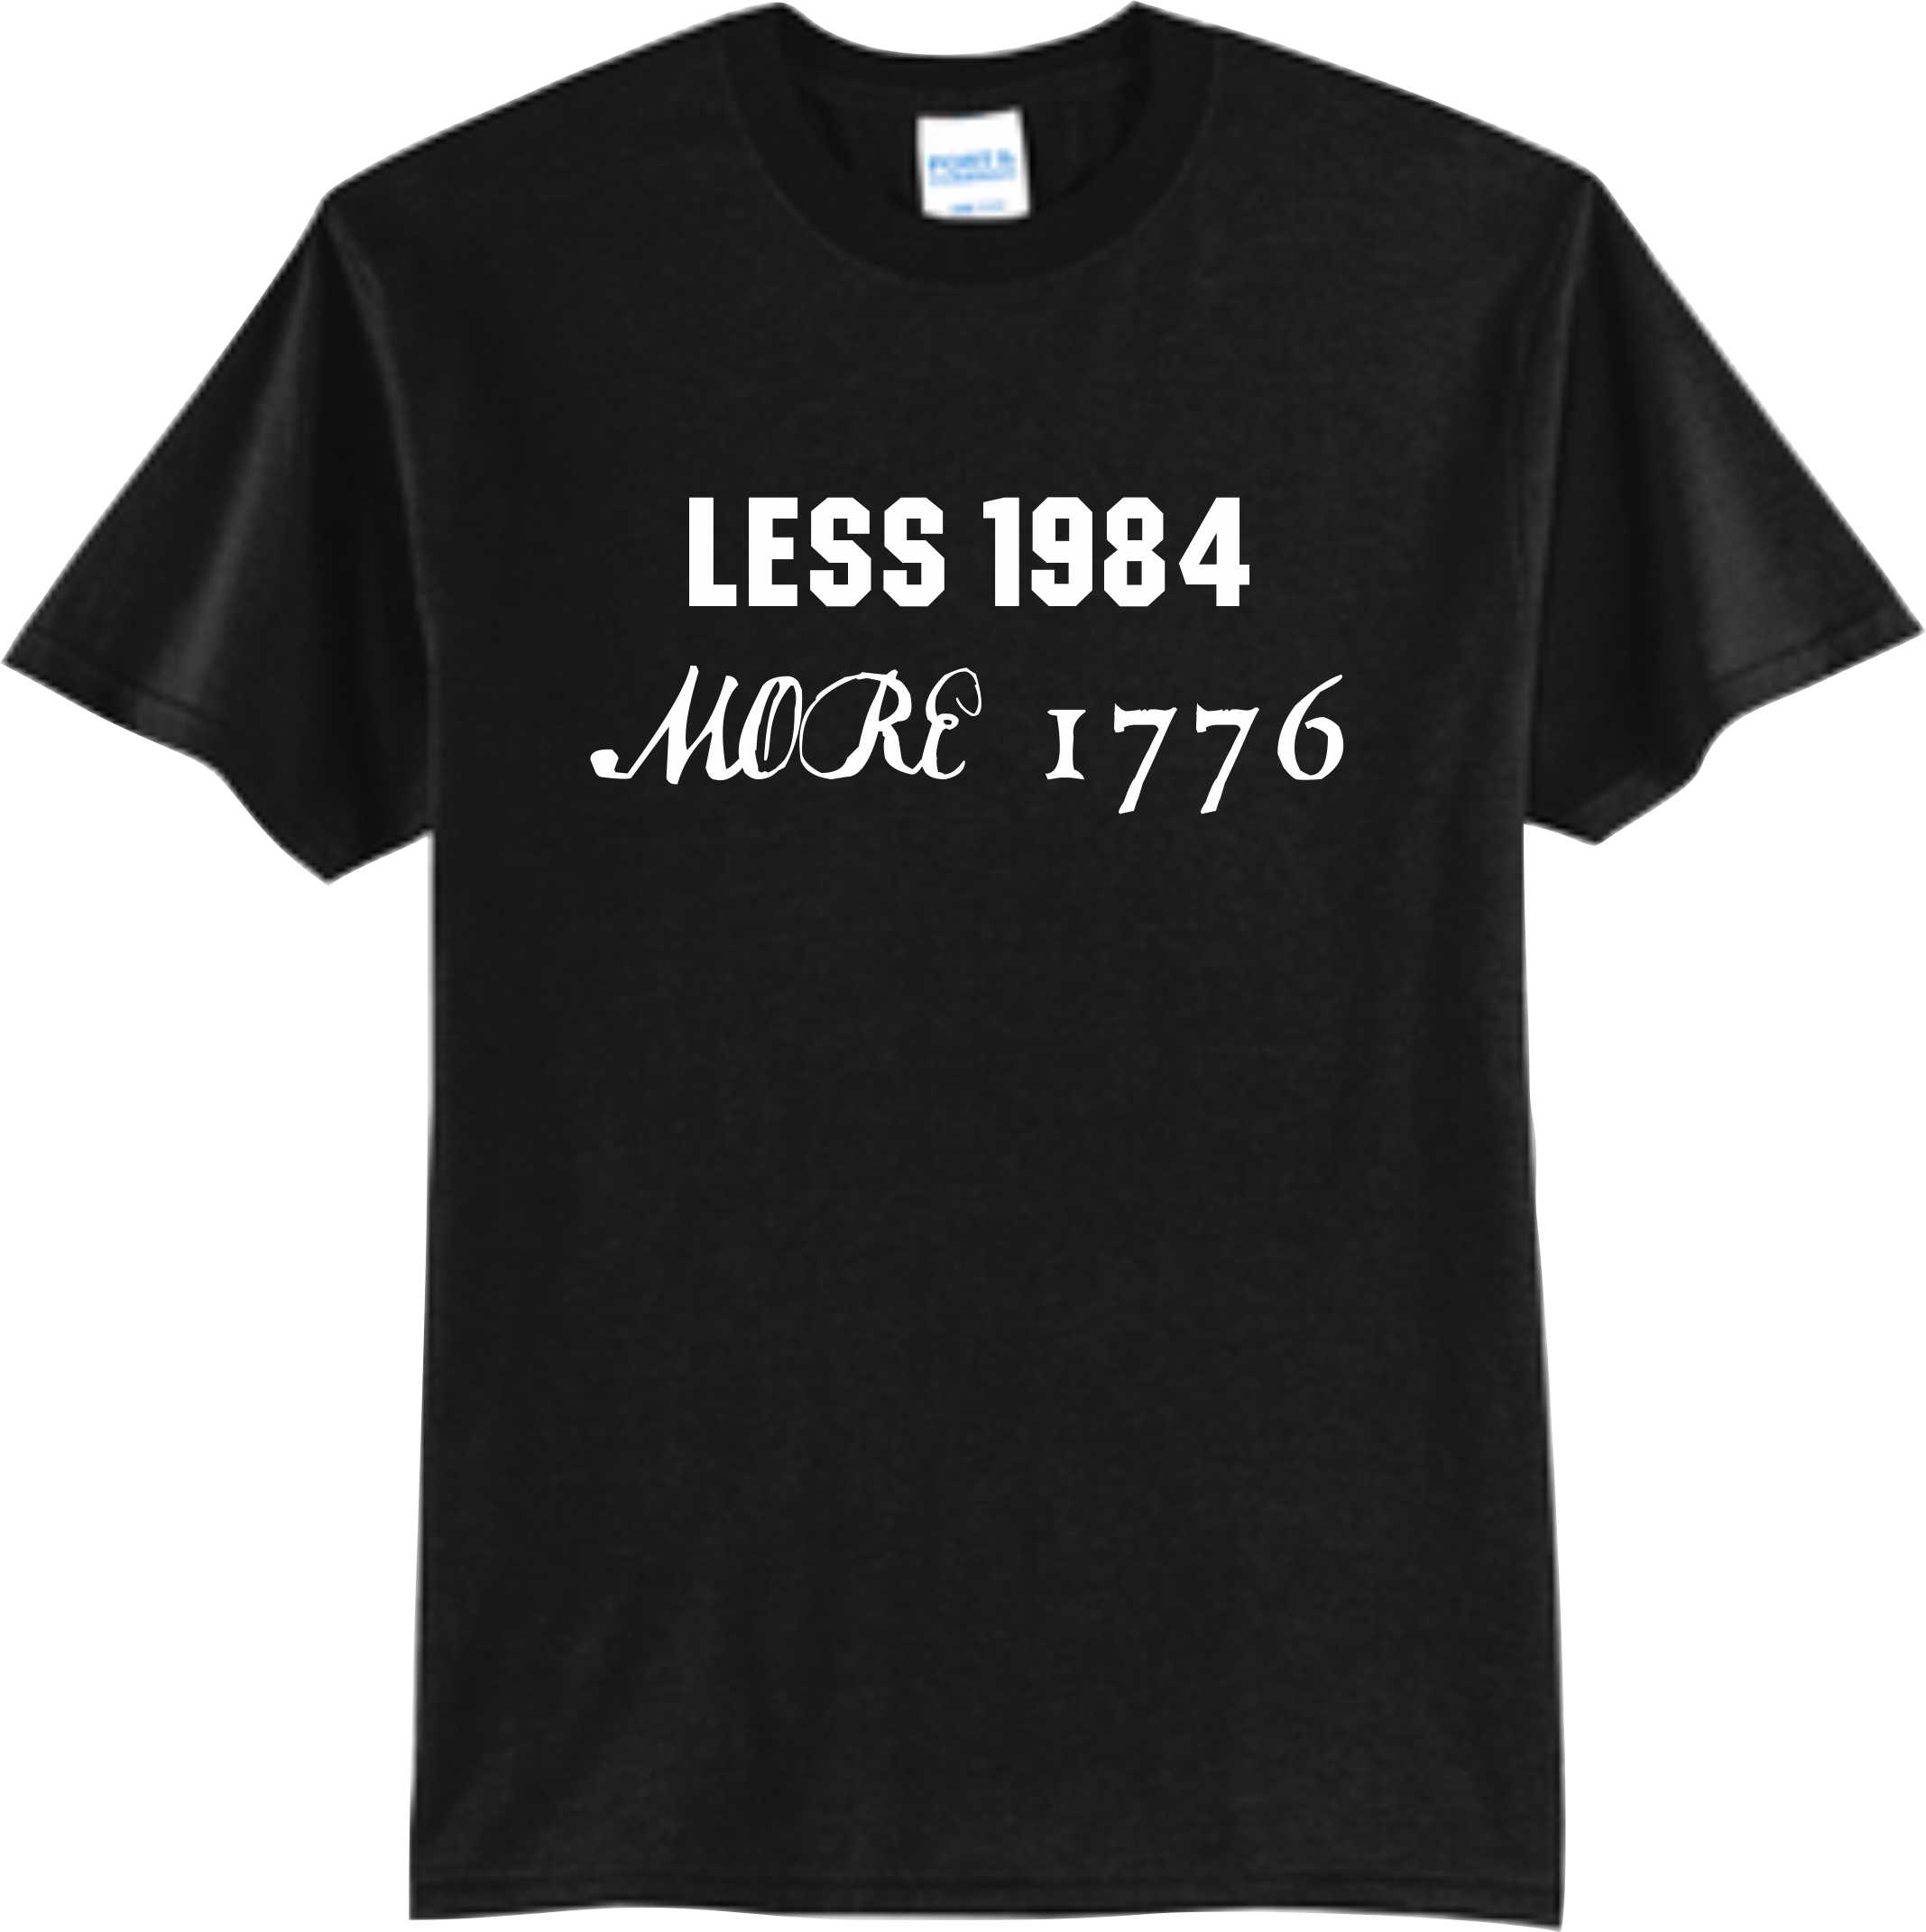 Less 1984 more 1776 shirt from NLA